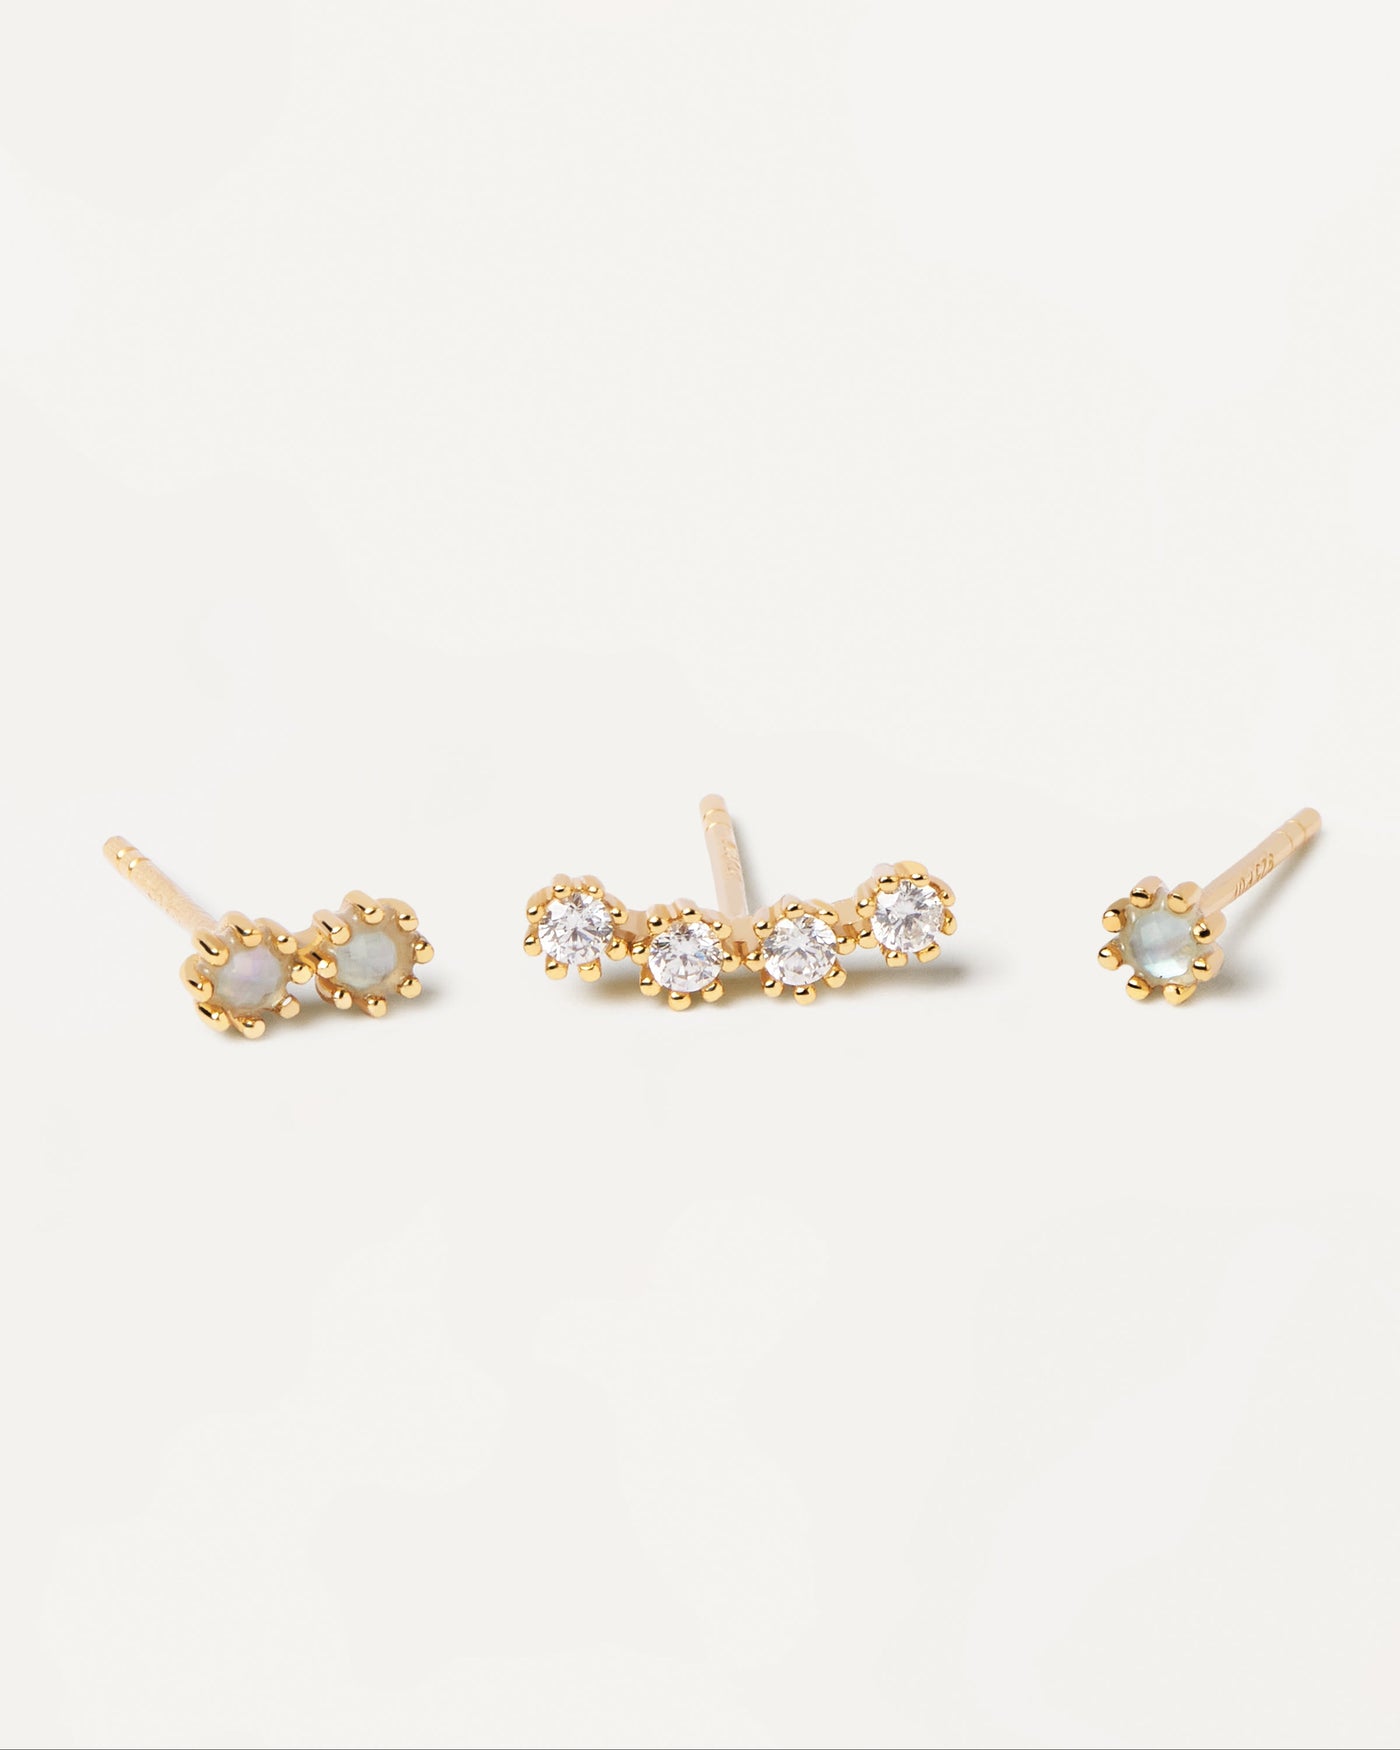 2023 Selection | Ocean Earrings Set. Set of 3 studs in gold-plated silver and white and blue zirconia. Get the latest arrival from PDPAOLA. Place your order safely and get this Best Seller. Free Shipping.